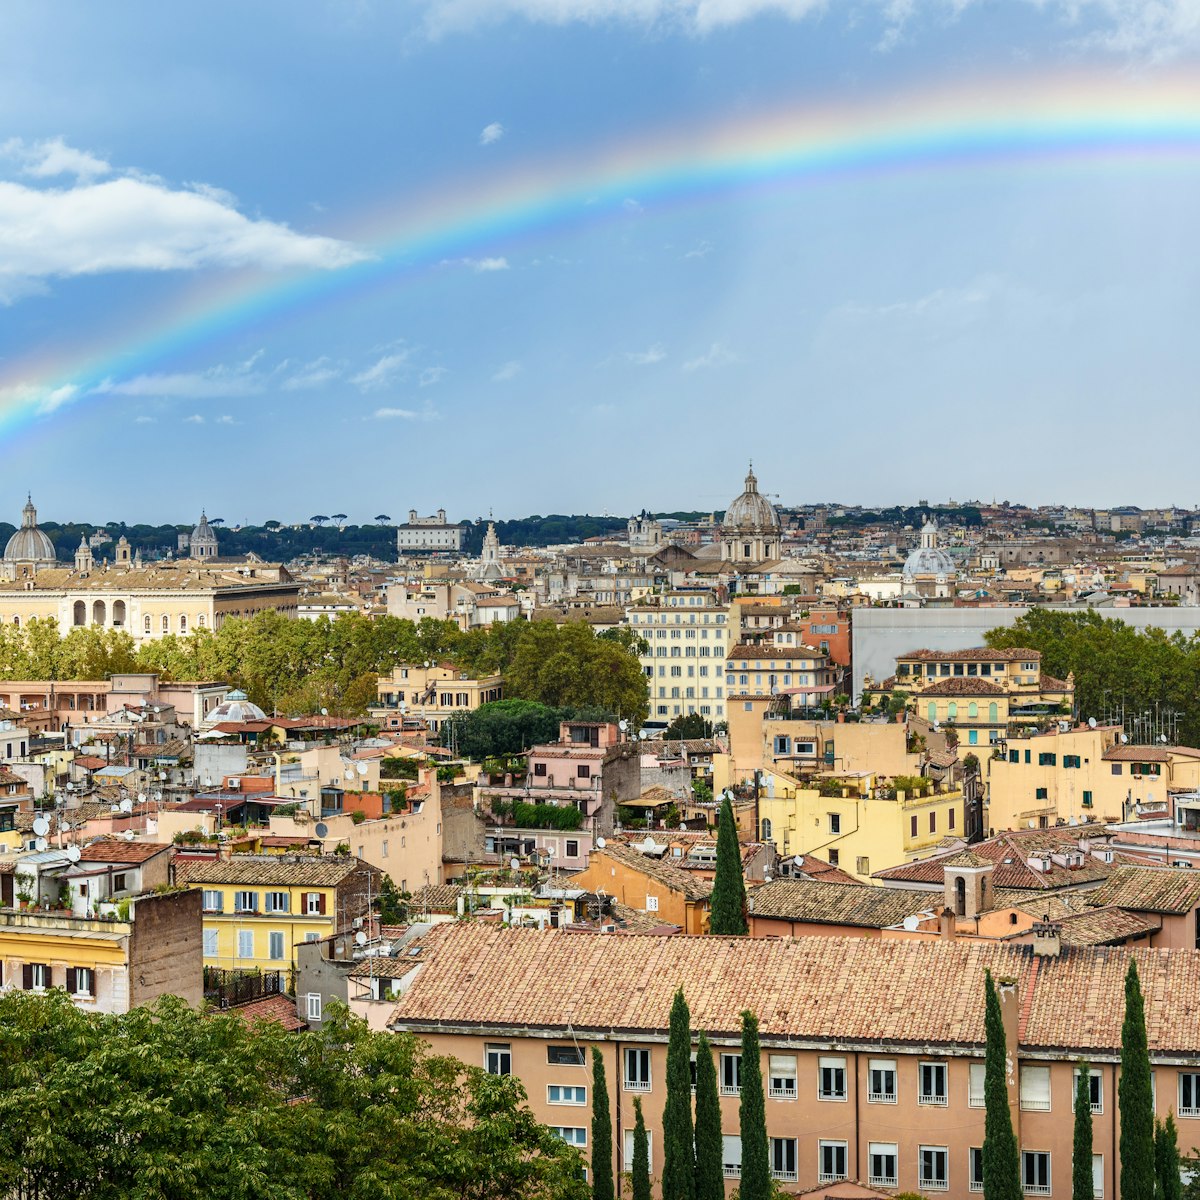 Rainbow over the rooftops of Rome, as seen from Janiculum hill, Terrazza del Gianicolo.
1273983688
aerial, ancient, architecture, building, capital, city, cityscape, culture, day, destination, europe, european, famous, garibaldi, gianicolo, hill, historical, history, italian, italy, janiculum, landmark, landscape, monument, old, piazza, rain, rainbow, roma, rome, sky, skyline, terrazza, tourism, tourist, town, travel, urban, view